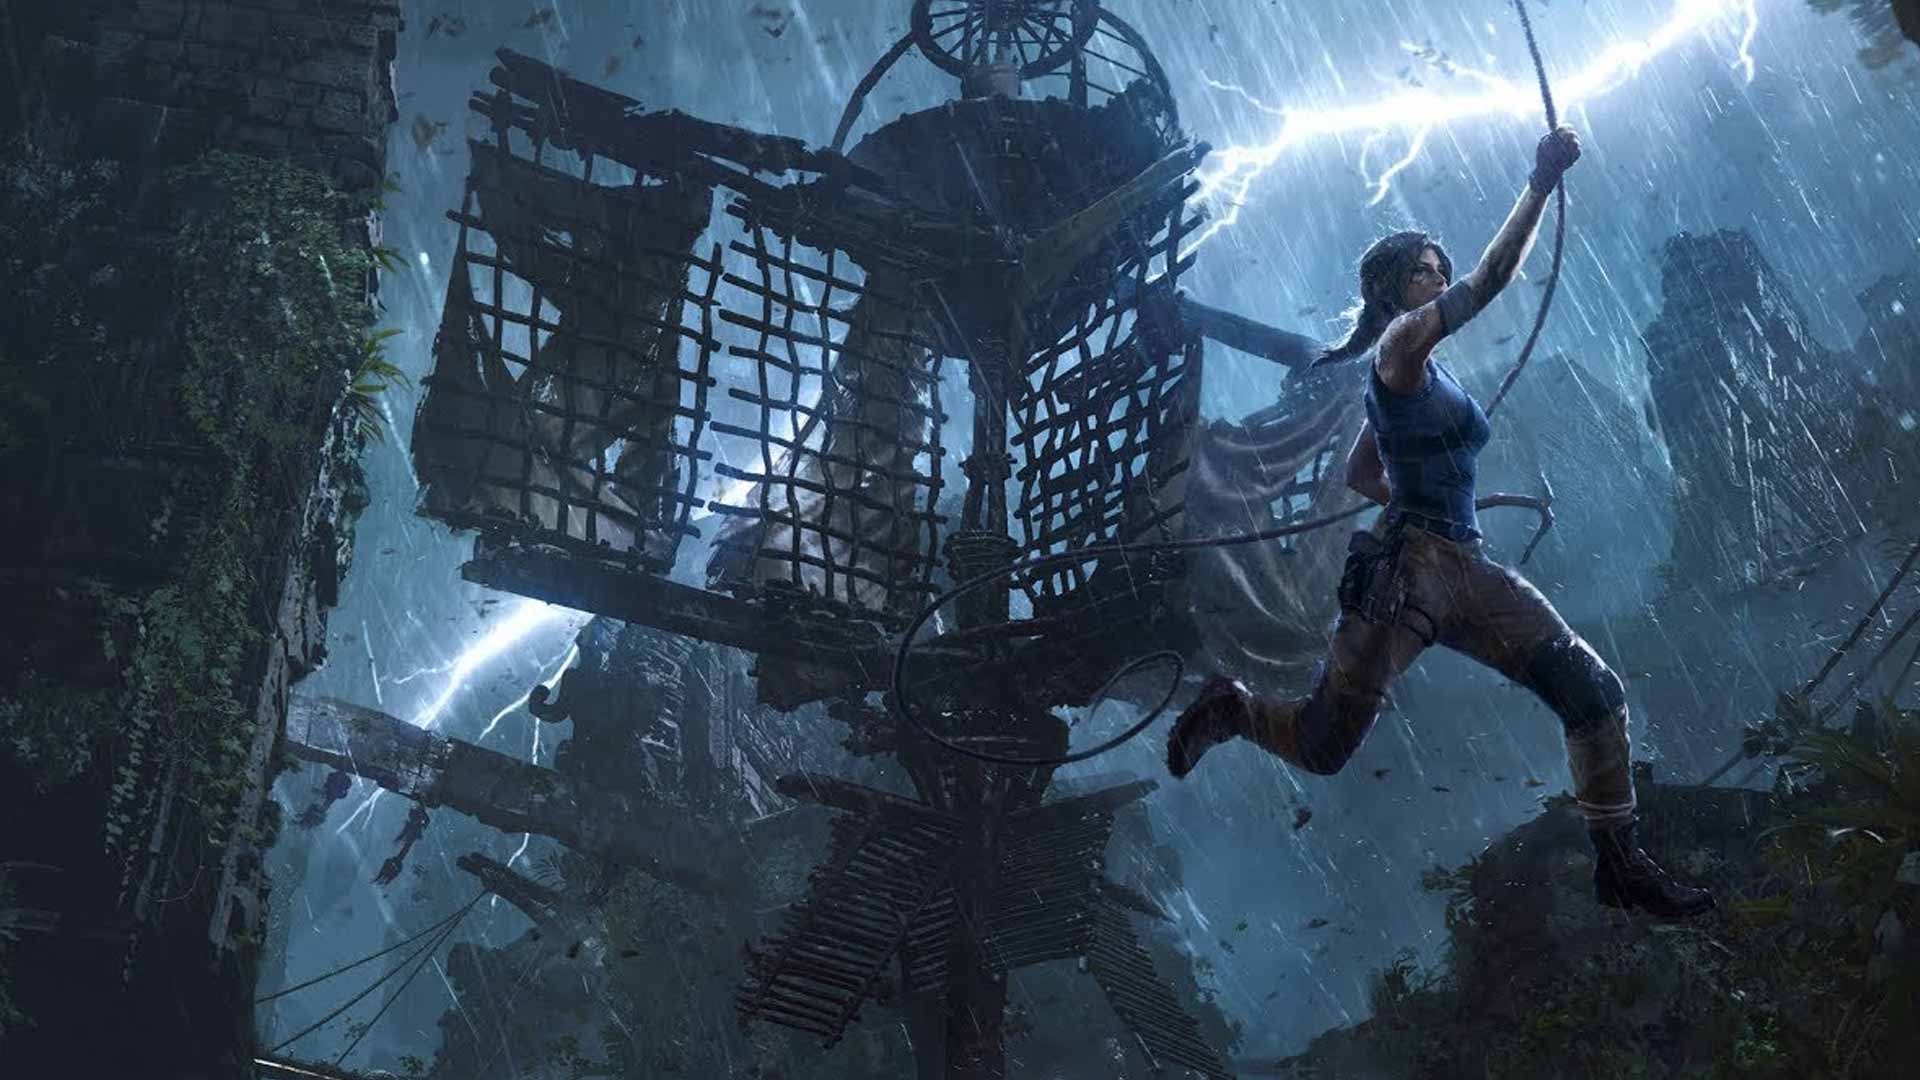 shadow of the tomb raider rating